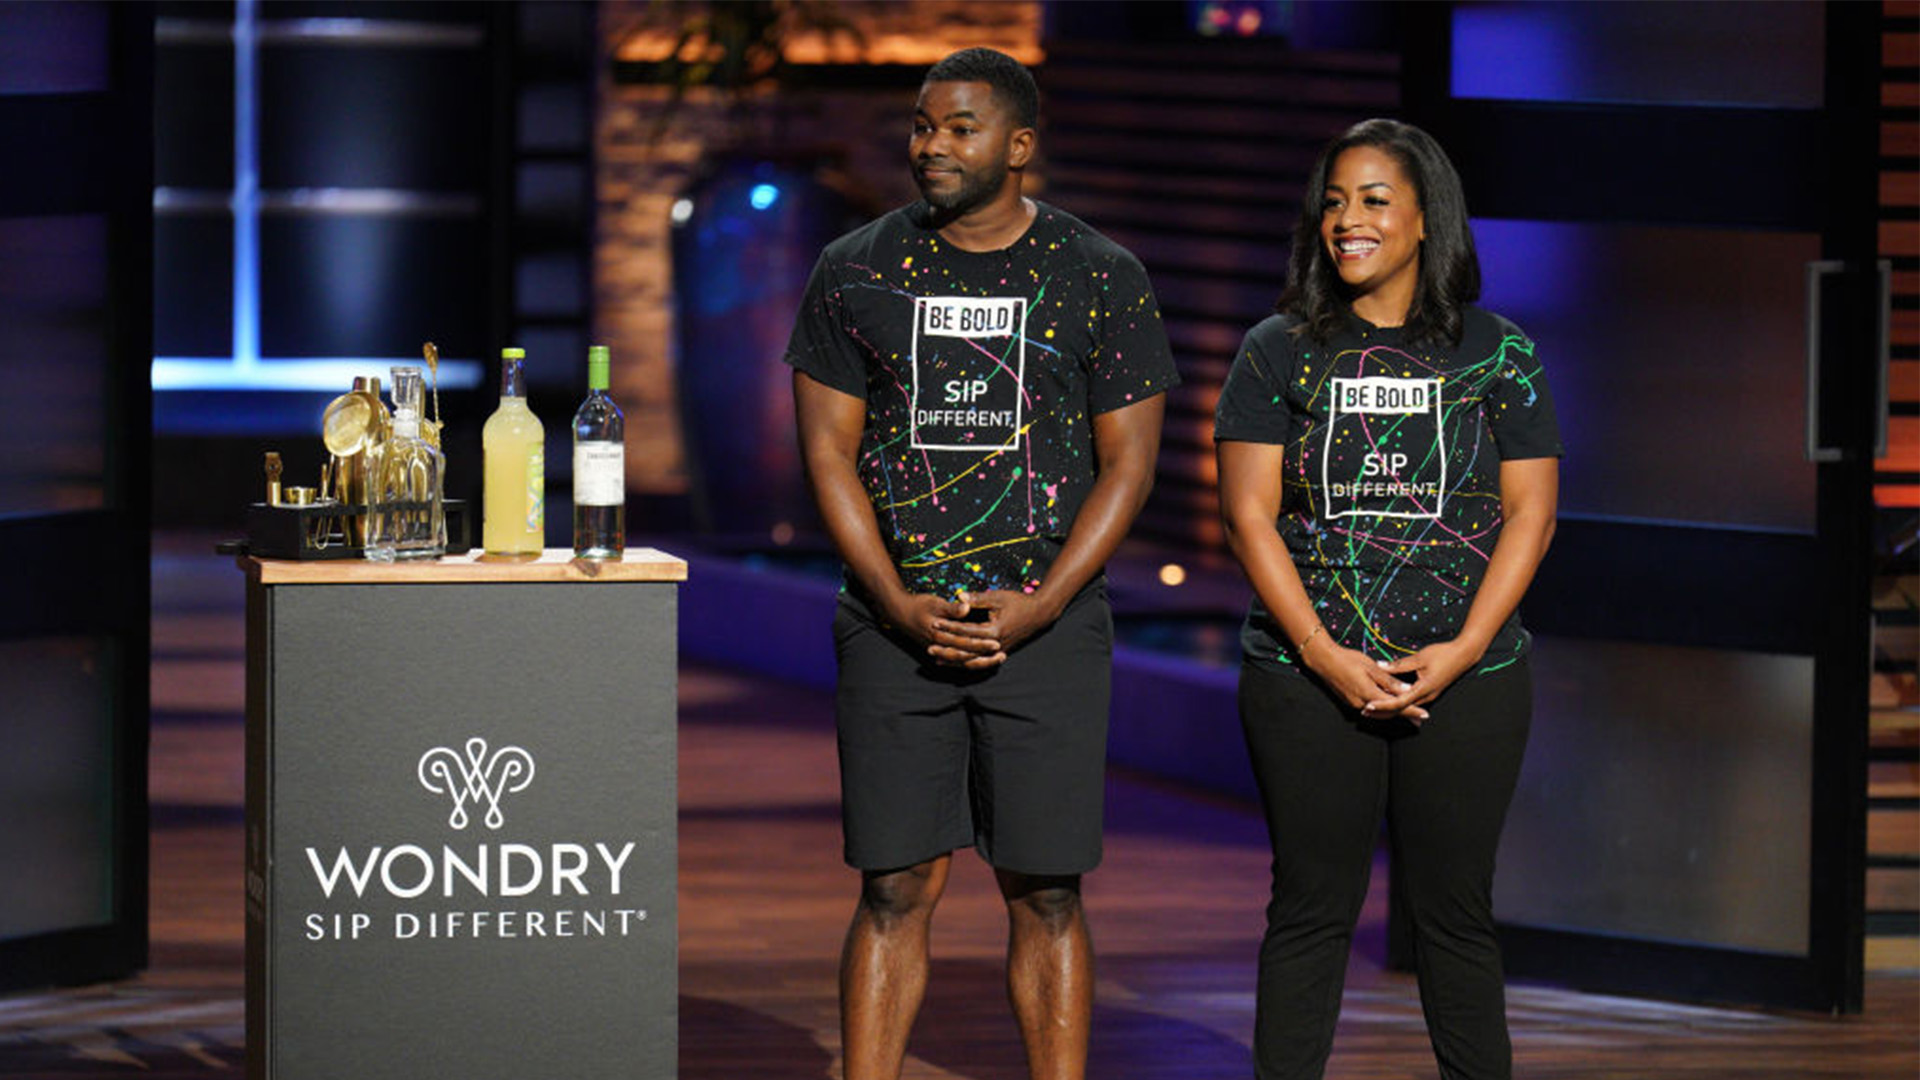 After Landing A $225K Investment From Mark Cuban On 'Shark Tank,' Couple Inks Deal With Leading Distributor In The Spirits Industry